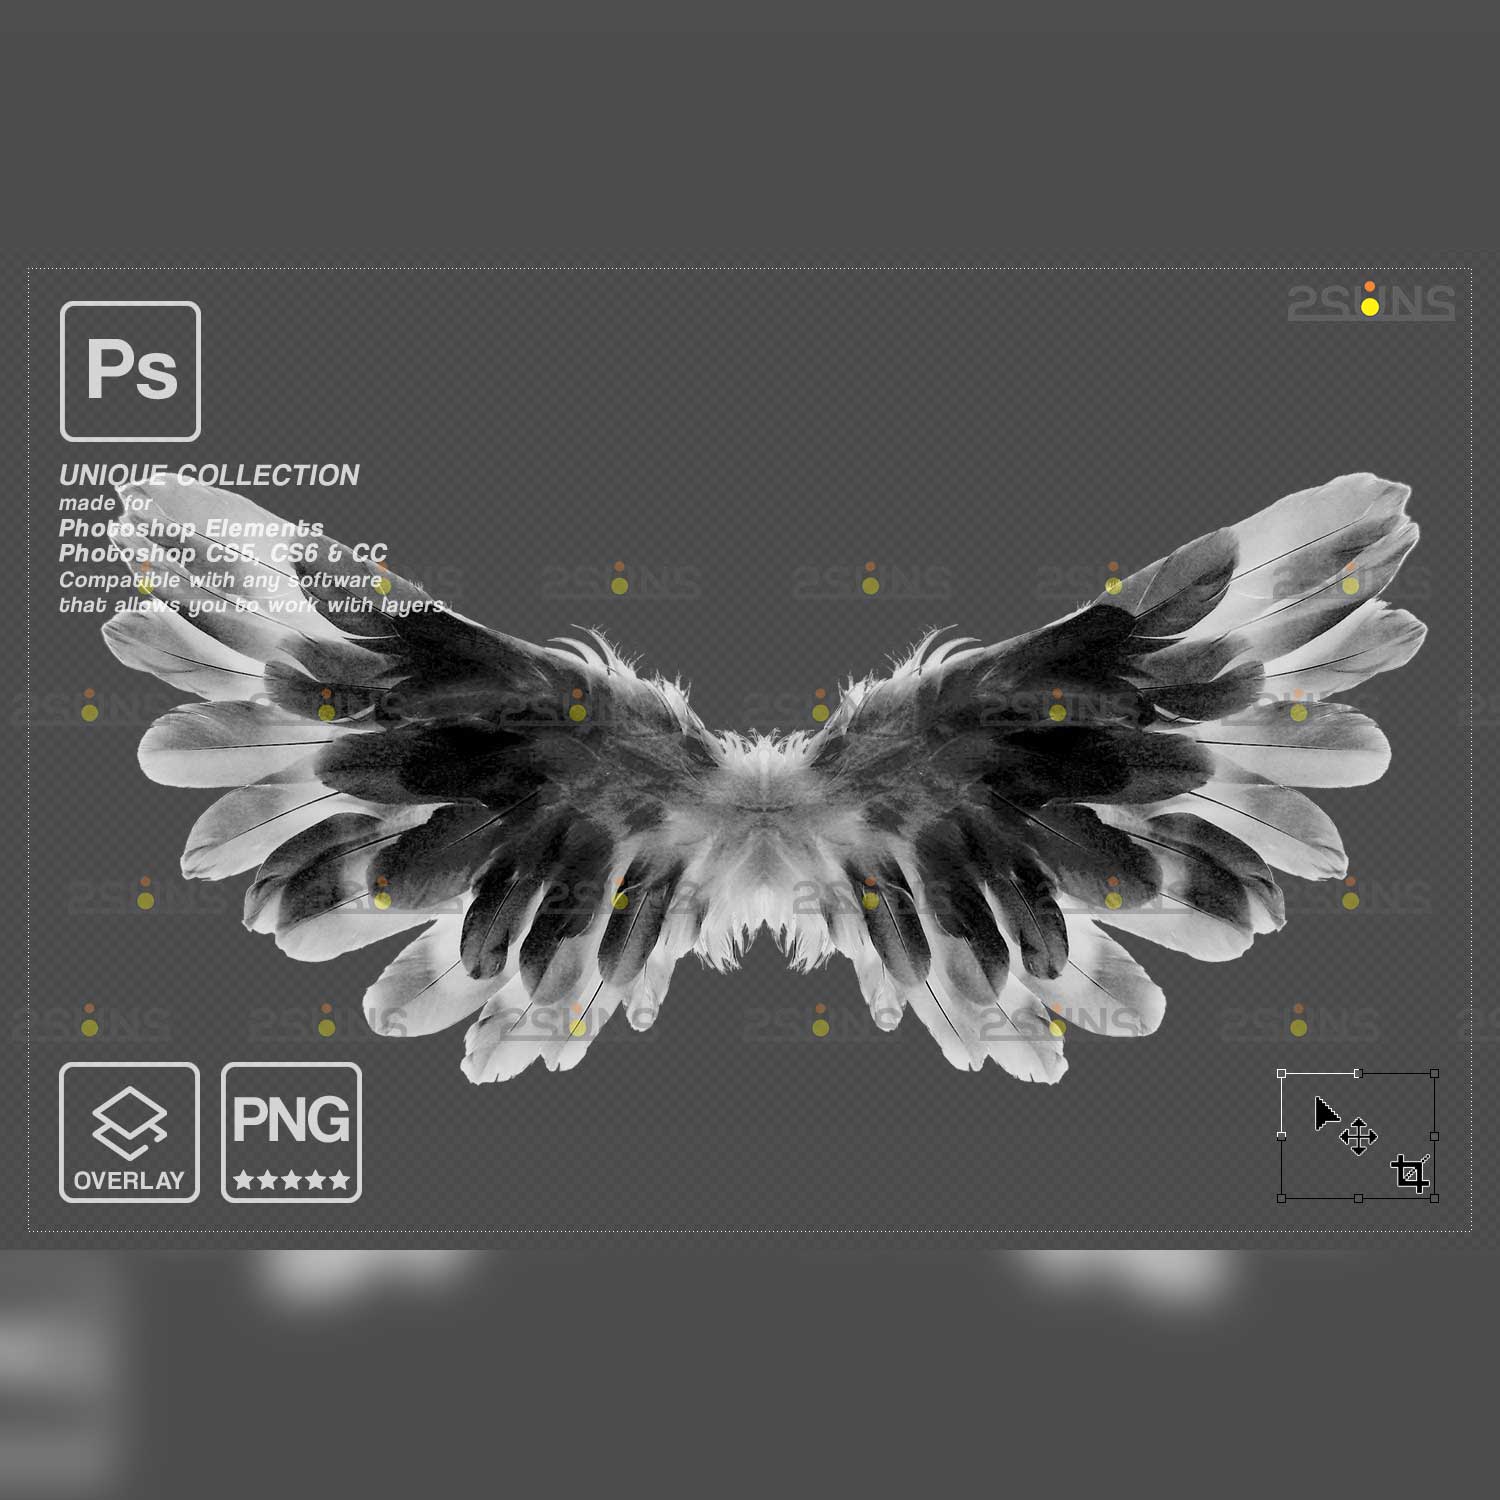 Realistic Black White Gold Angel Wings Photoshop Overlays.